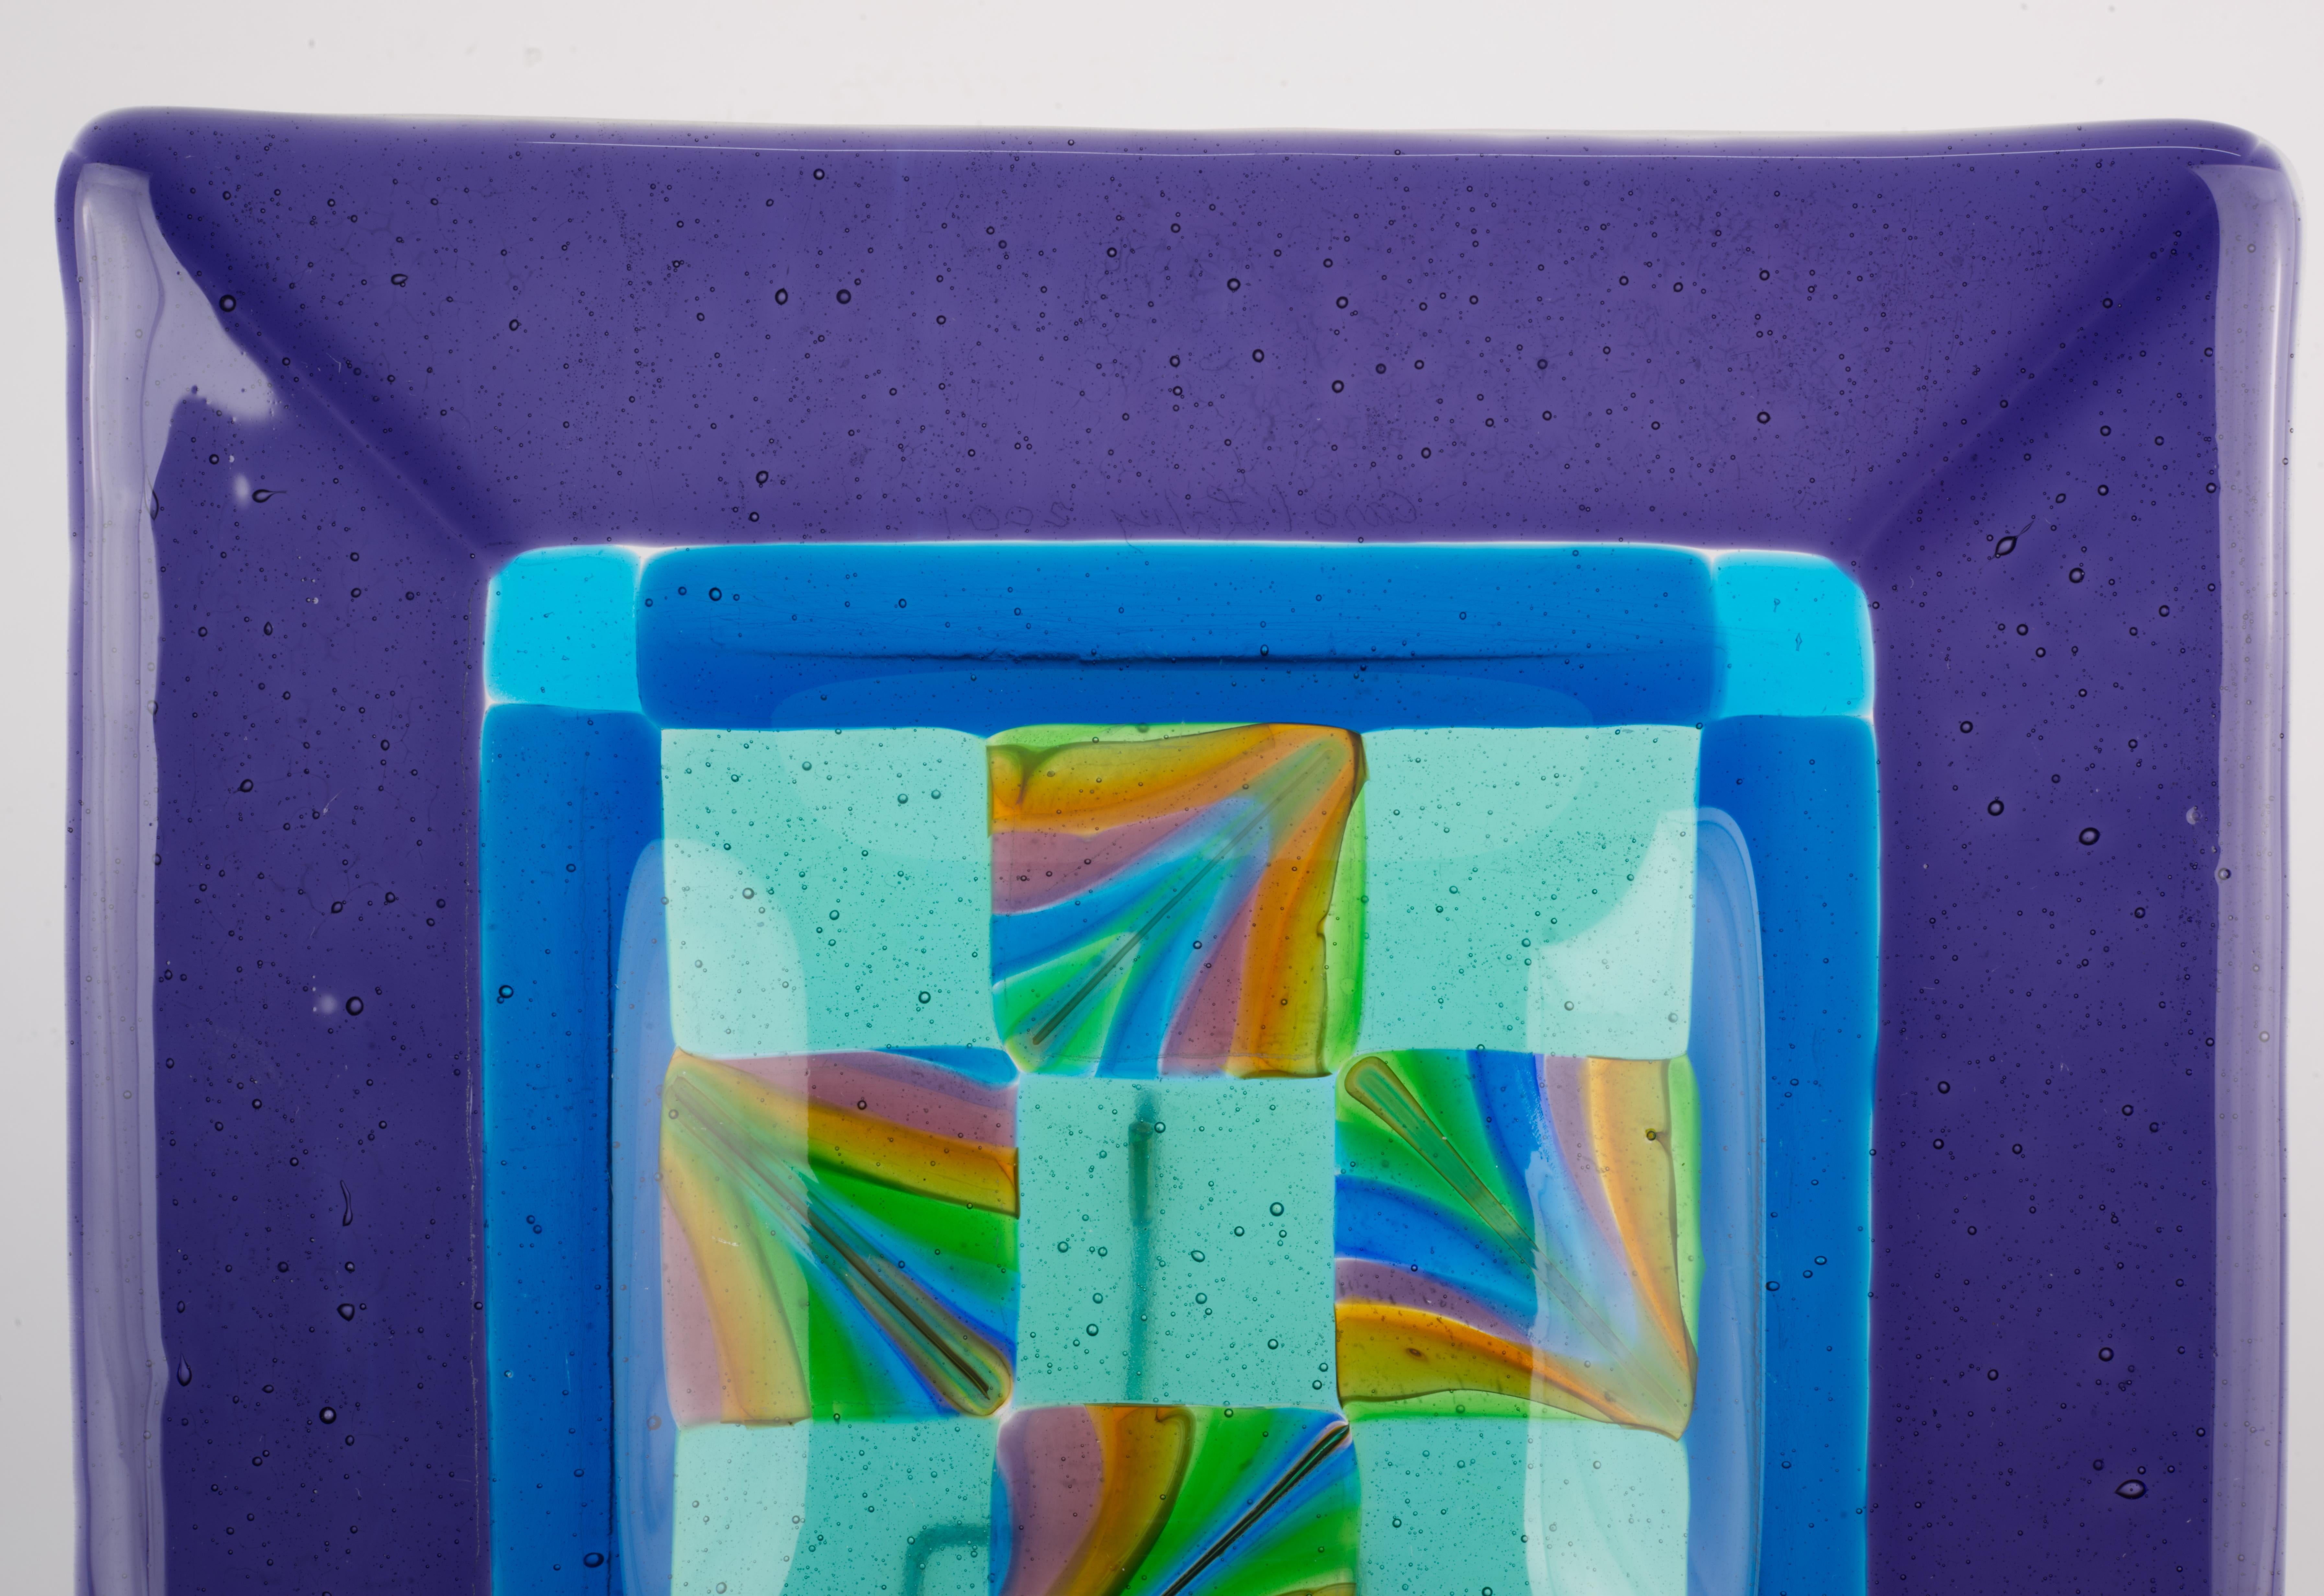  Fused glass square vide-poche or ashtray has wide rim of deep amethyst purple color and complex central bowl with checkered pattern in the center, encircled by a blue band. All areas of solid color glass have controlled bubbles effect, adding to